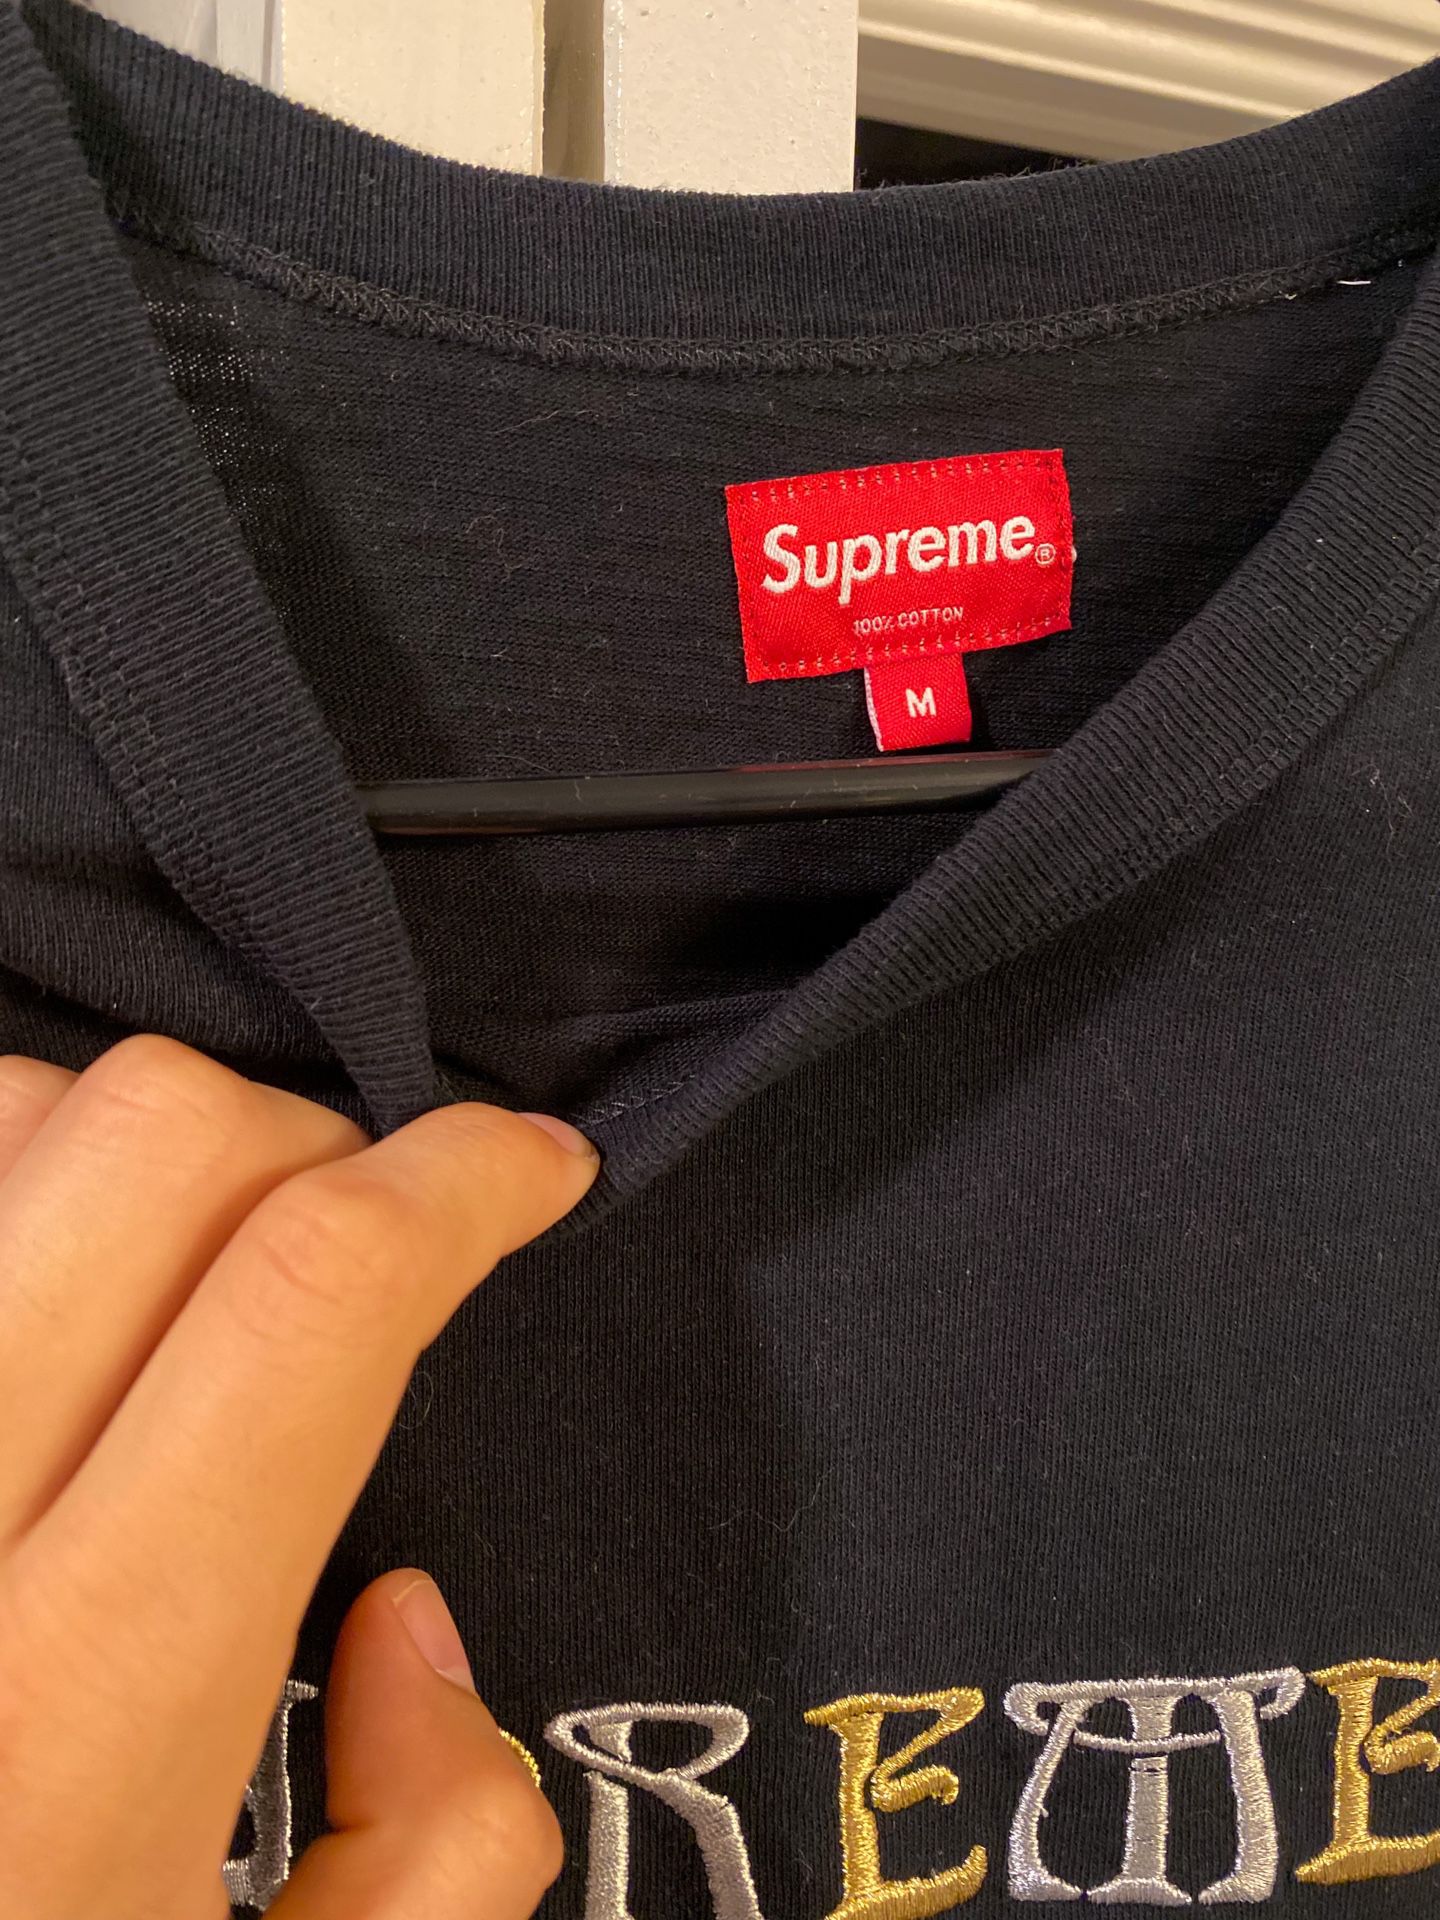 Supreme knitted tee